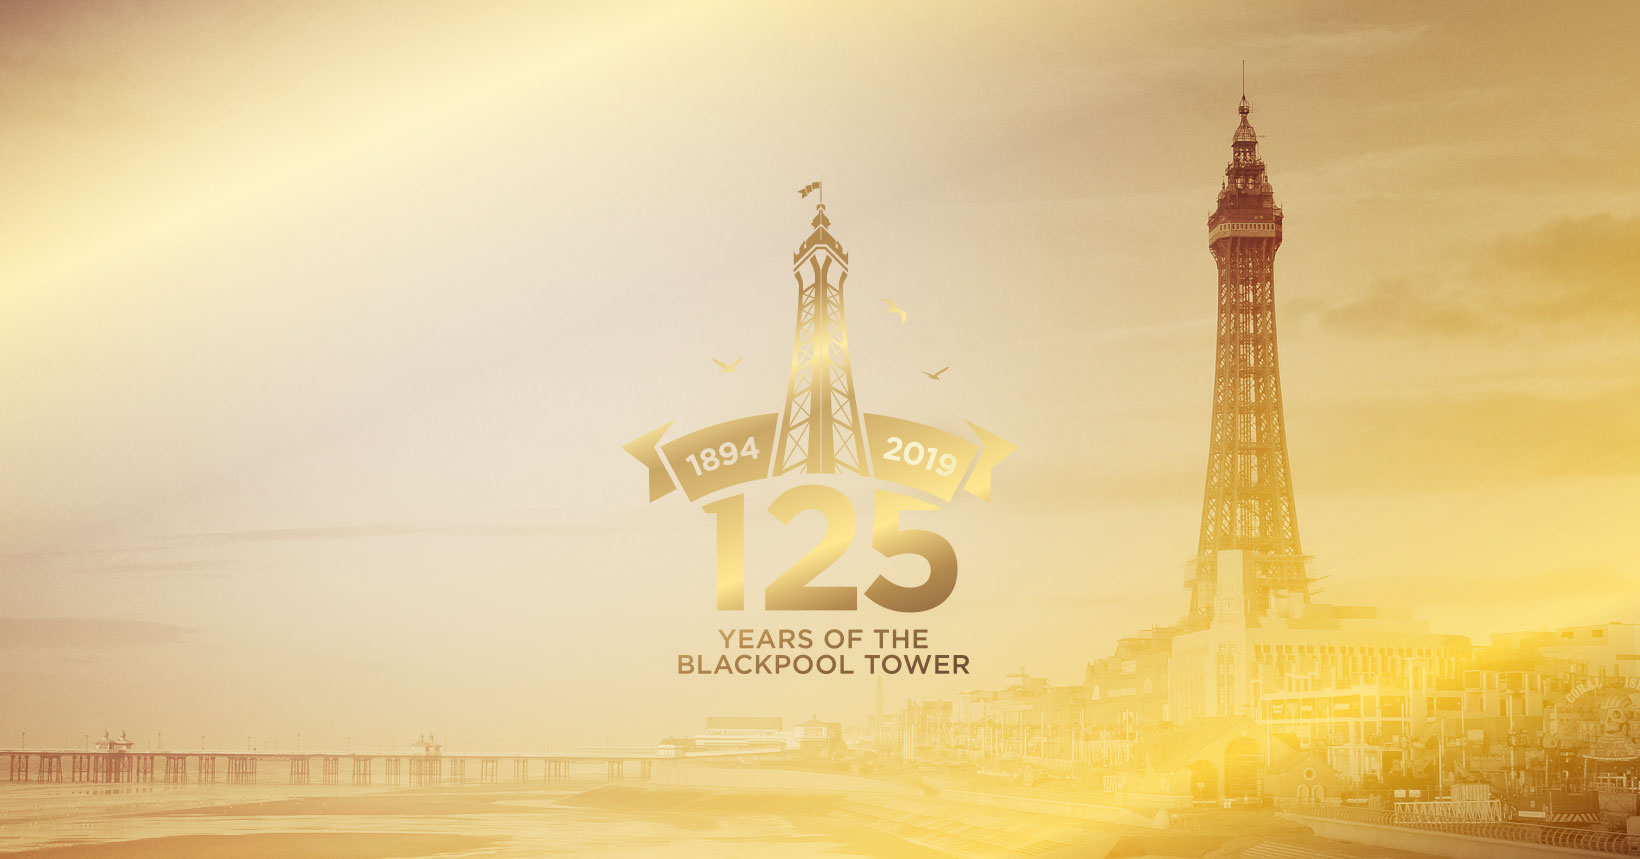 125 years of the Blackpool Tower